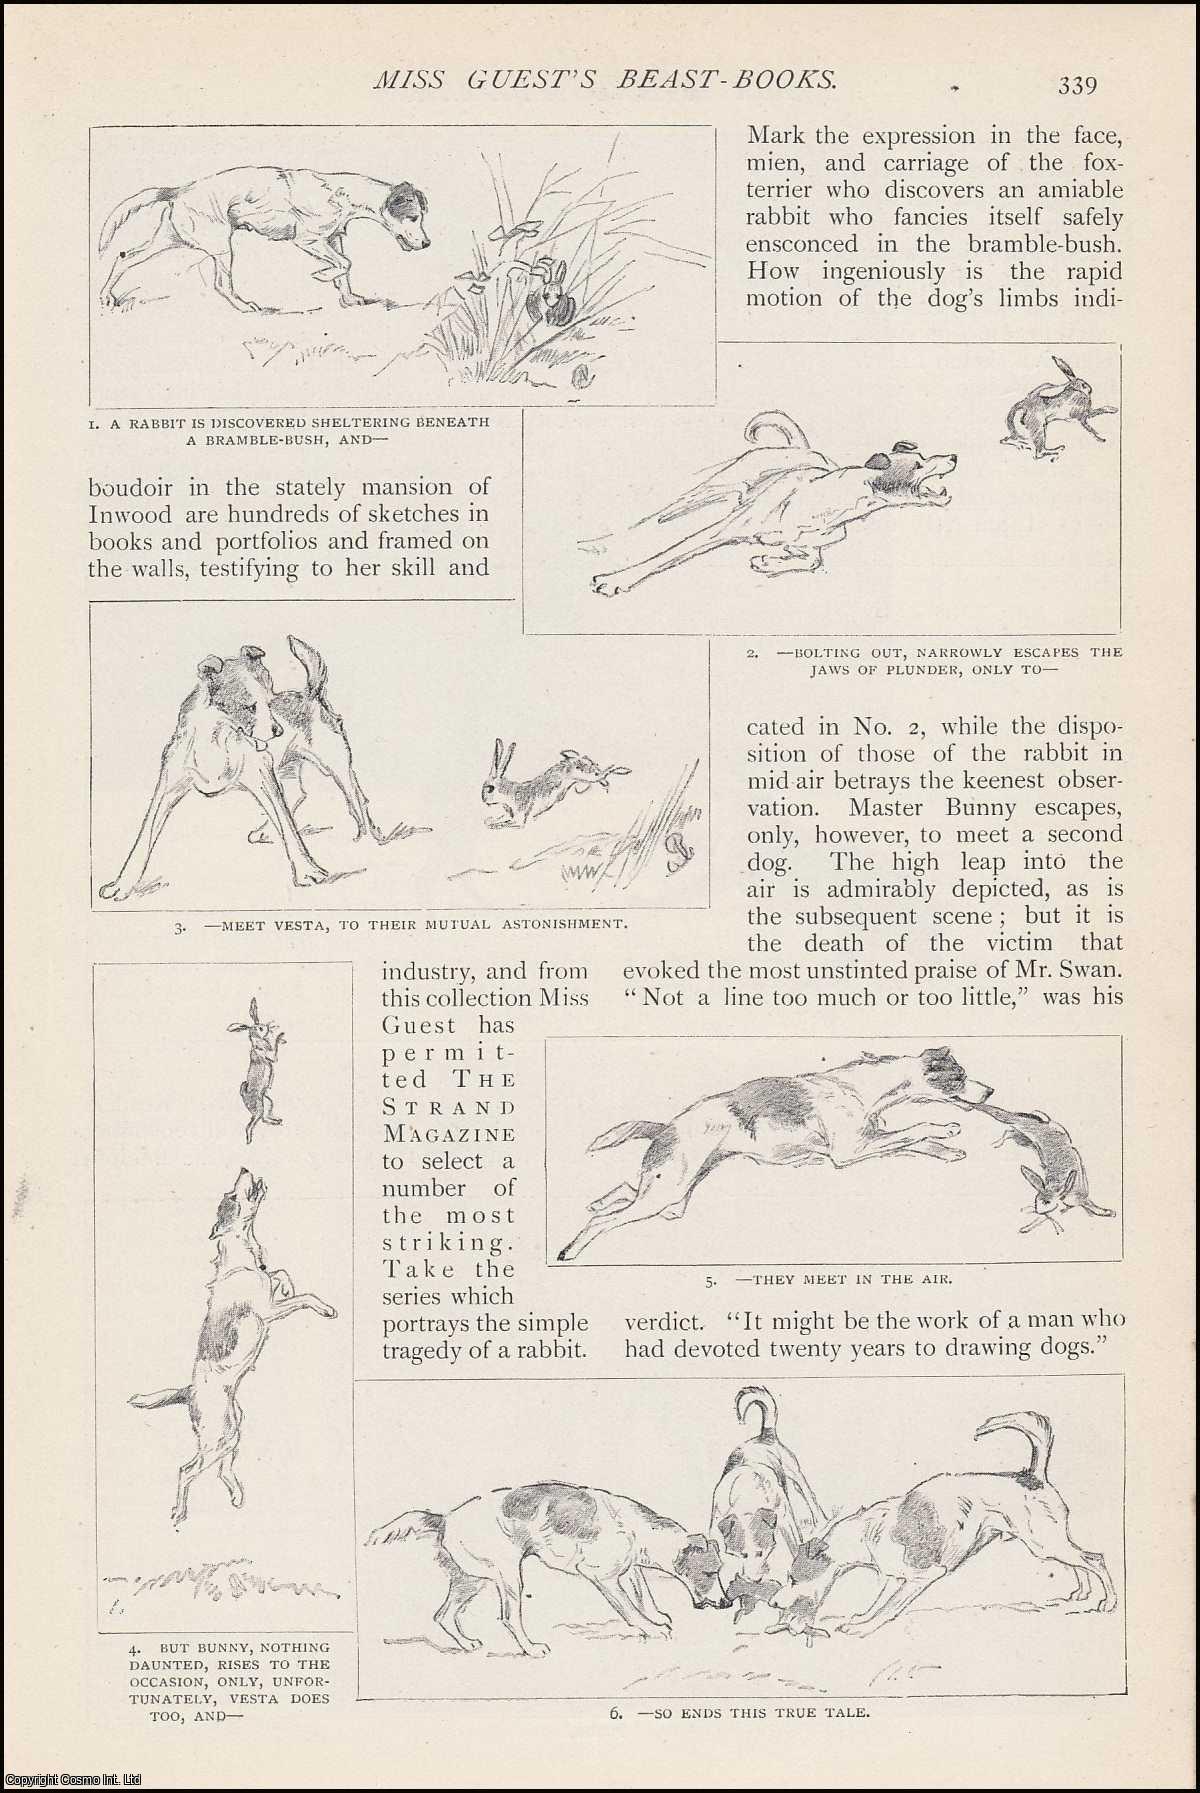 No Author Stated - Miss Augusta Guest's Beast-Books : drawings of dogs. An uncommon original article from The Strand Magazine, 1906.